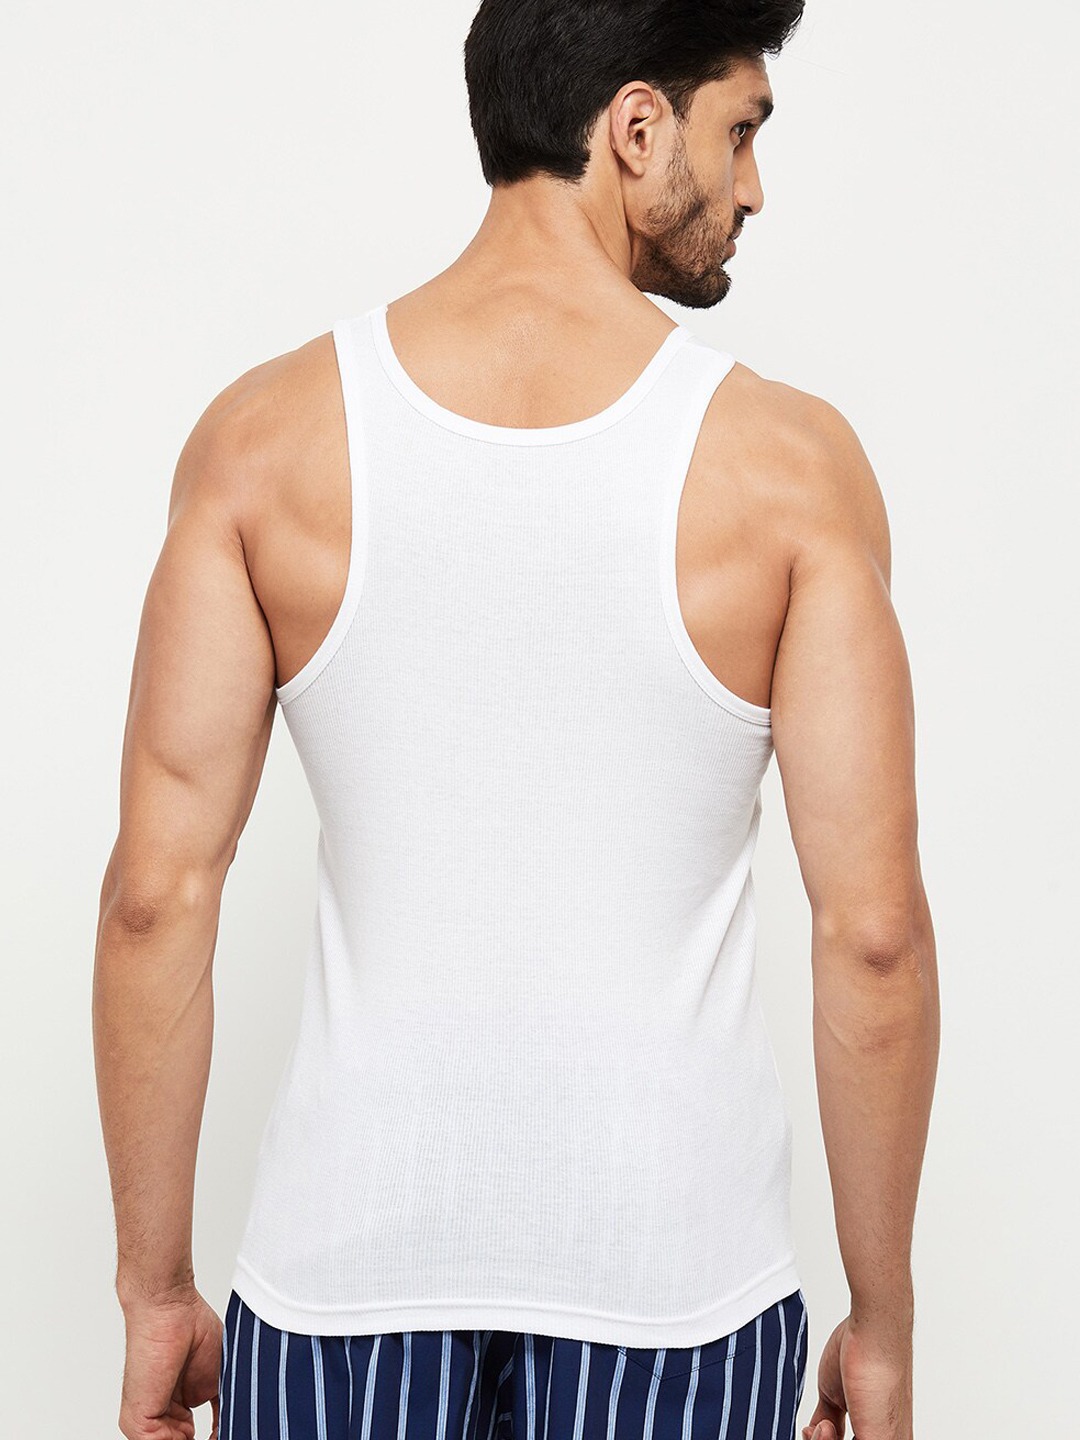 Clothing Innerwear Vests | max Men White Pack of 2 Solid Cotton Innerwear Vest NOOSNRBVWH3WHITE - ME68438